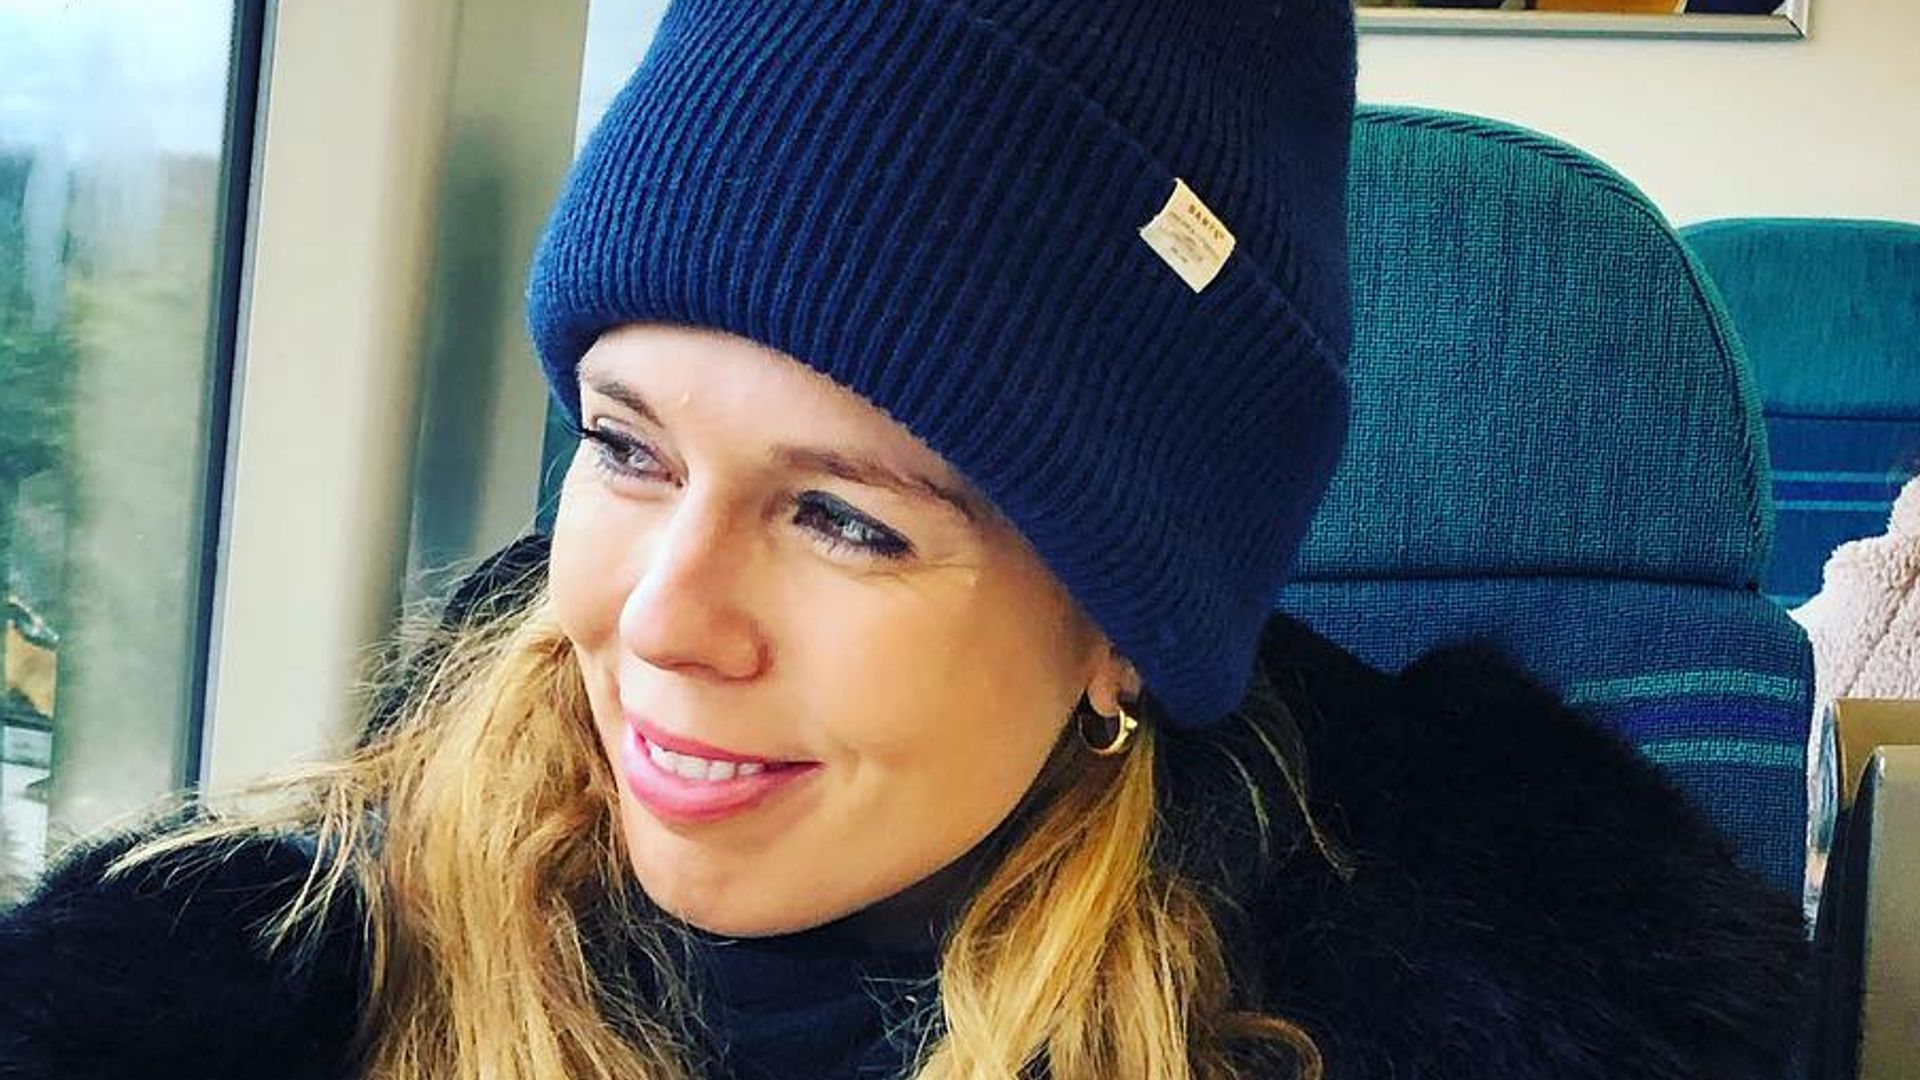 Carrie Johnson shares adorable photos of three children from lavish family ski trip